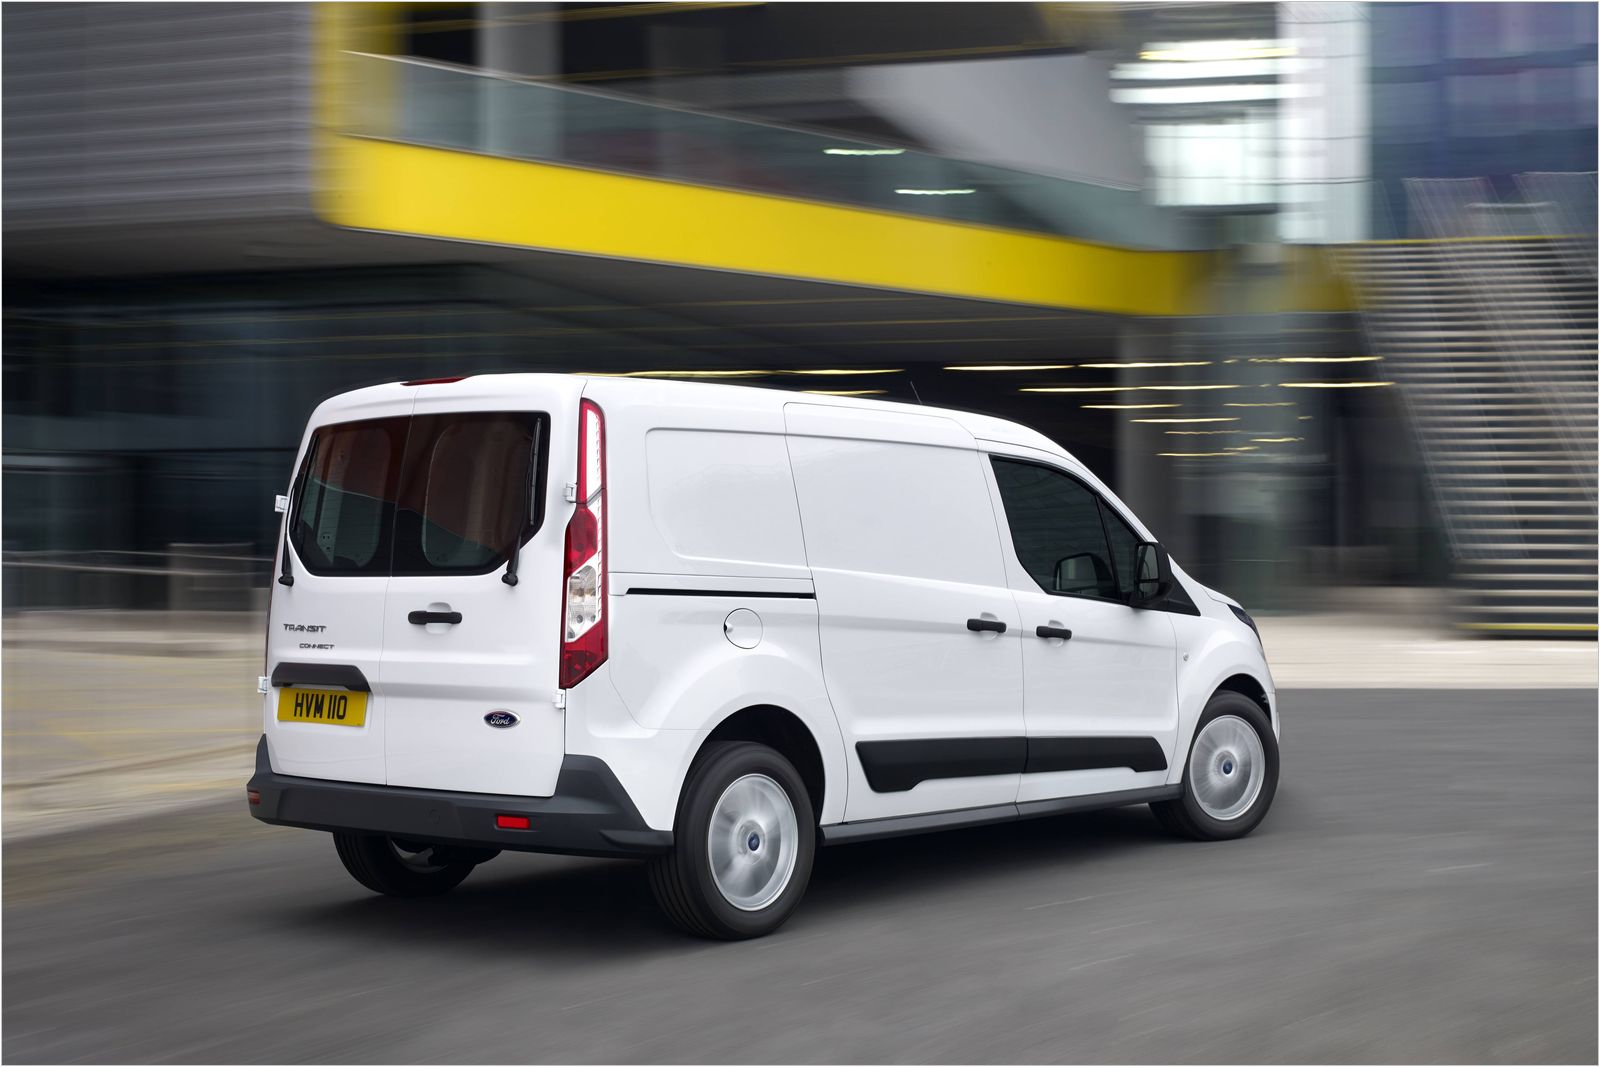 Ford Transit Connect, 1600x1067px, img-2